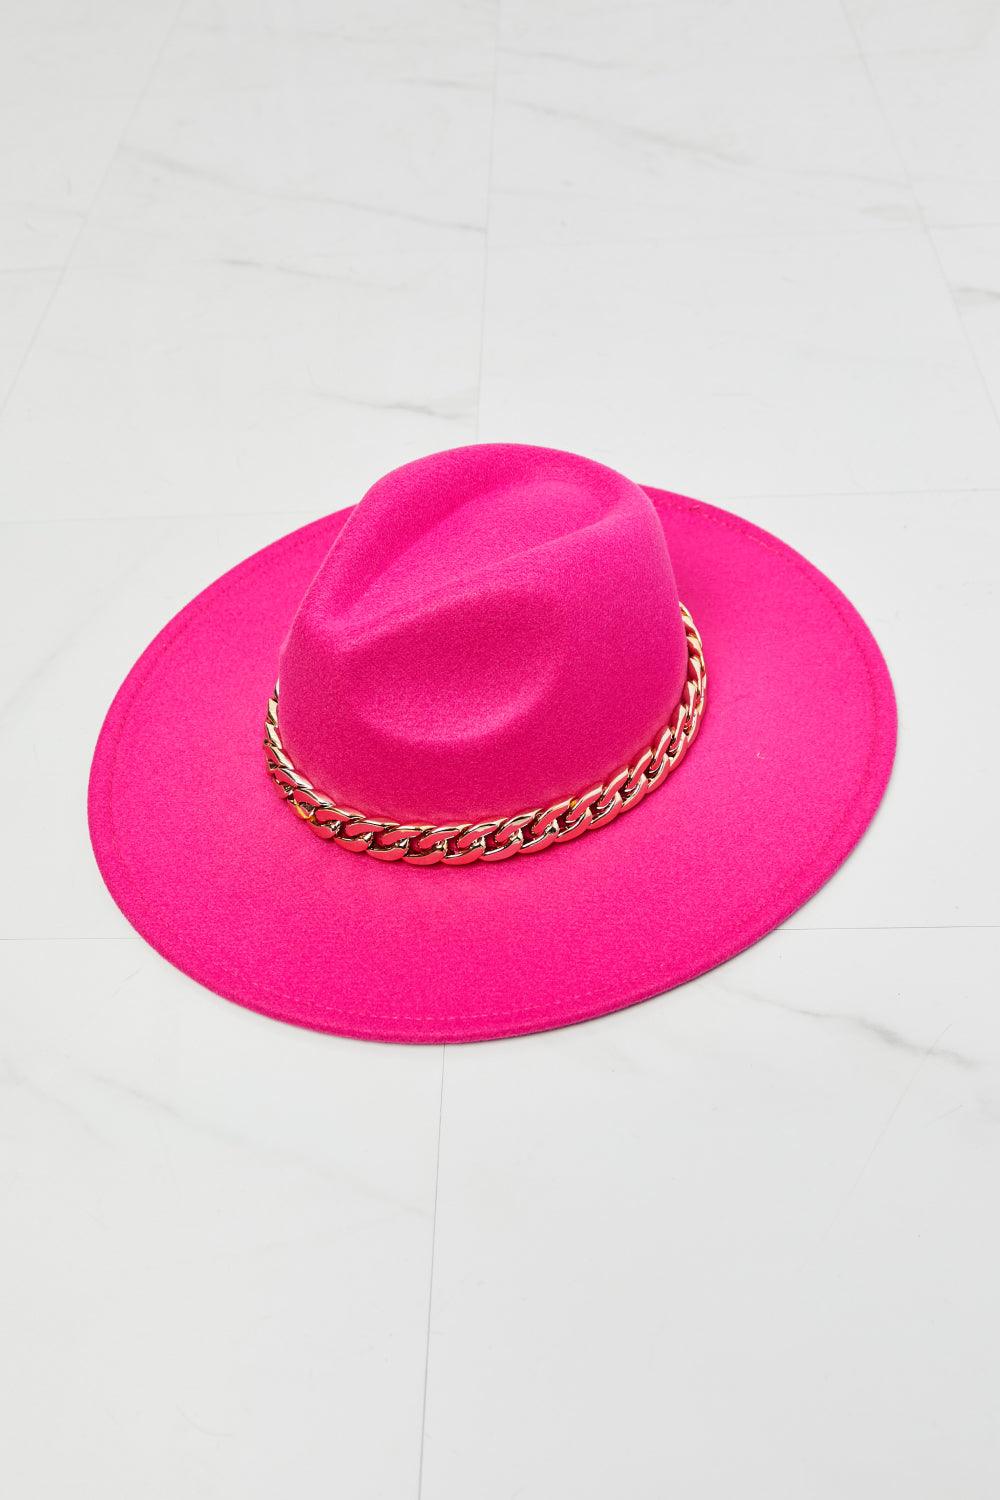 Women's Accessories - Hats Fame Keep Your Promise Fedora Hat In Pink